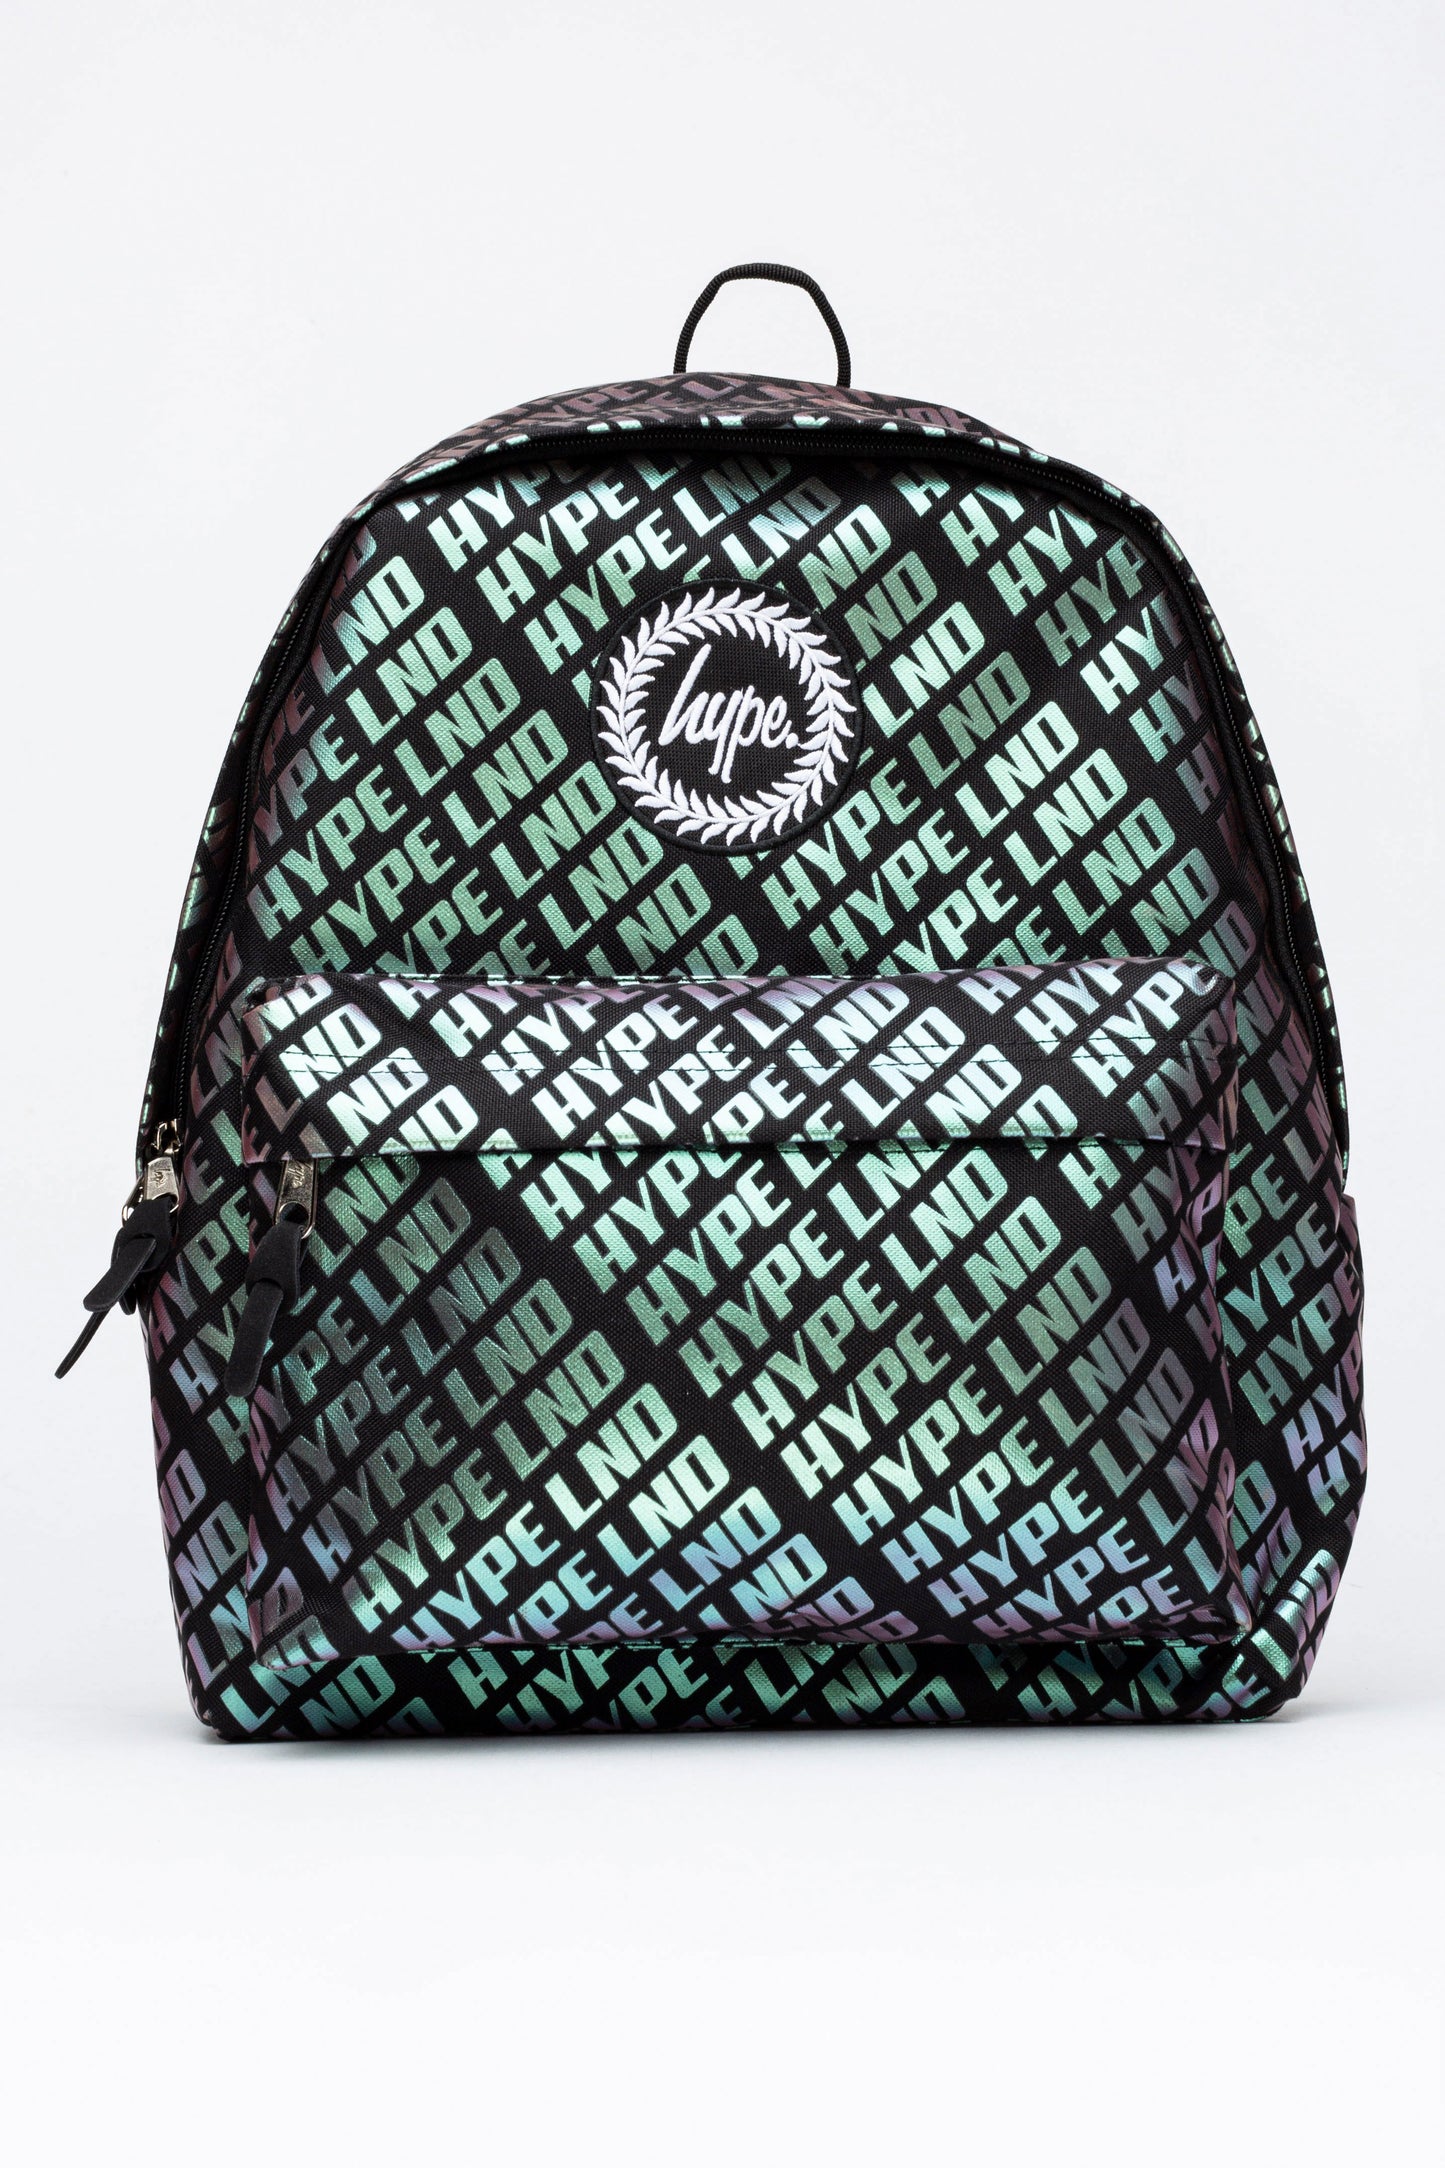 HYPE IRIDESCENT HYPE LND BACKPACK